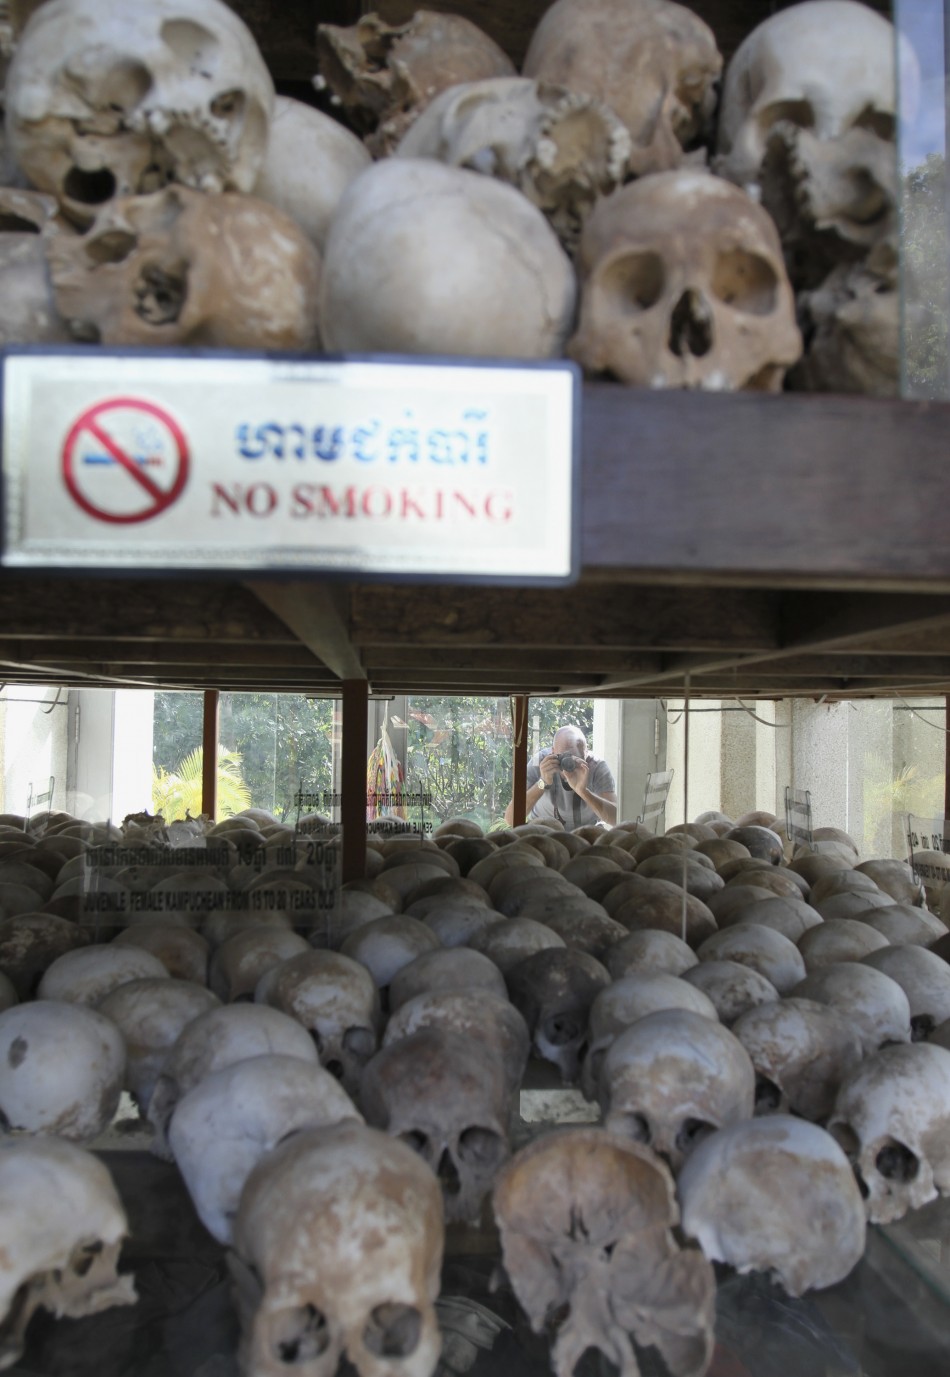 A tourist takes a photograph of skulls at a memorial stupa at Choeung Ek, a quotKilling Fieldsquot site located on the outskirts of Phnom Penh